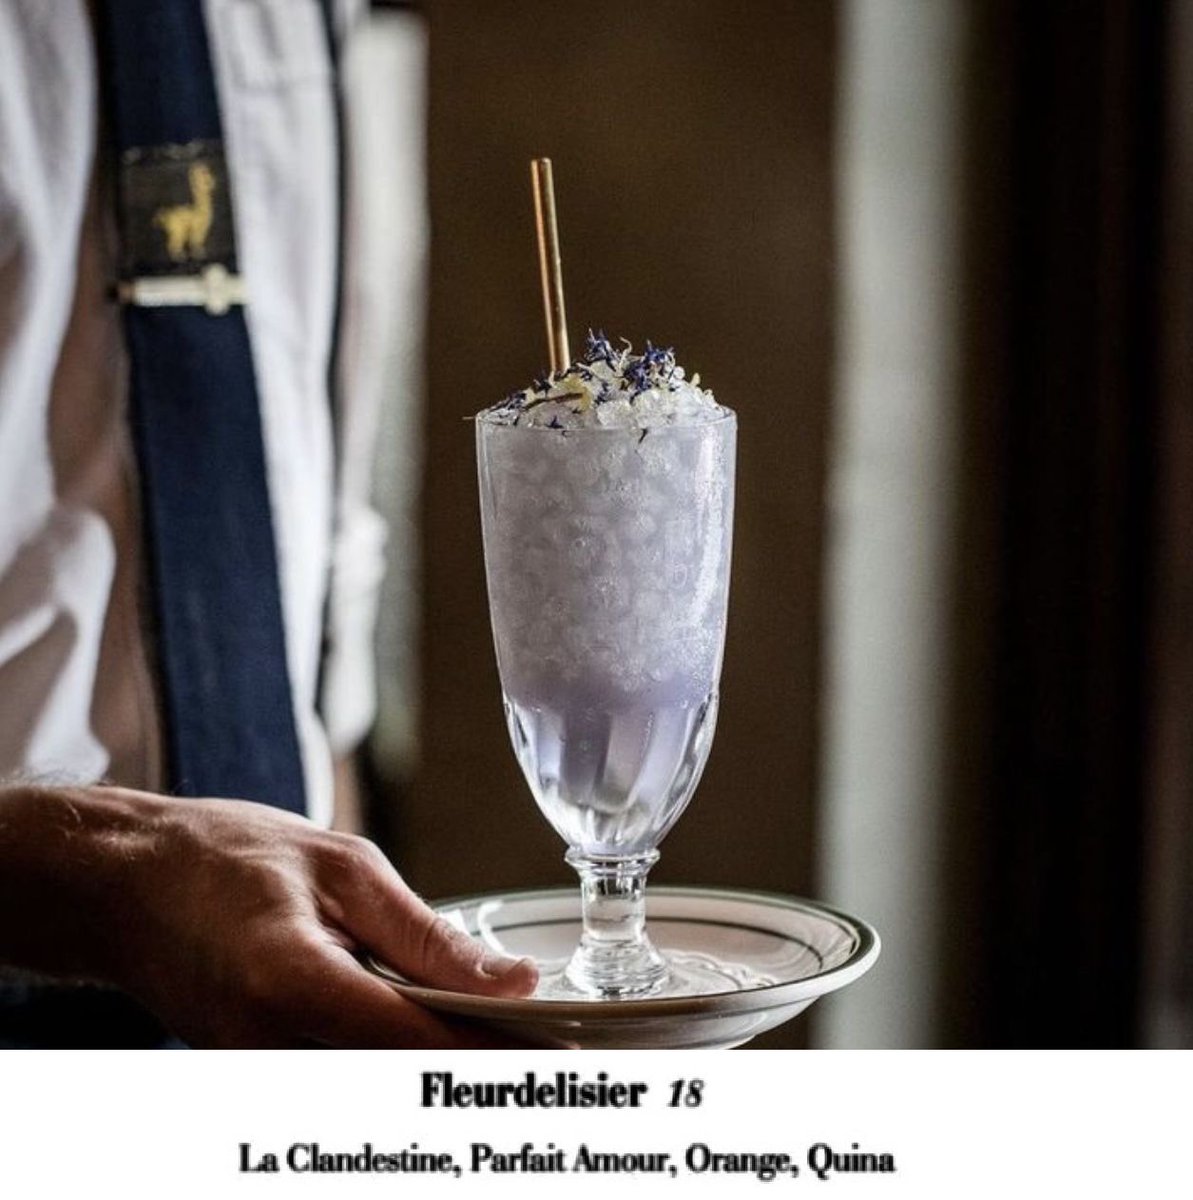 Thrilled to see the #Fleurdelisier cocktail on the #absinthe menu at @maisonpremiere. Great photo by #ericmedsker. Santé!